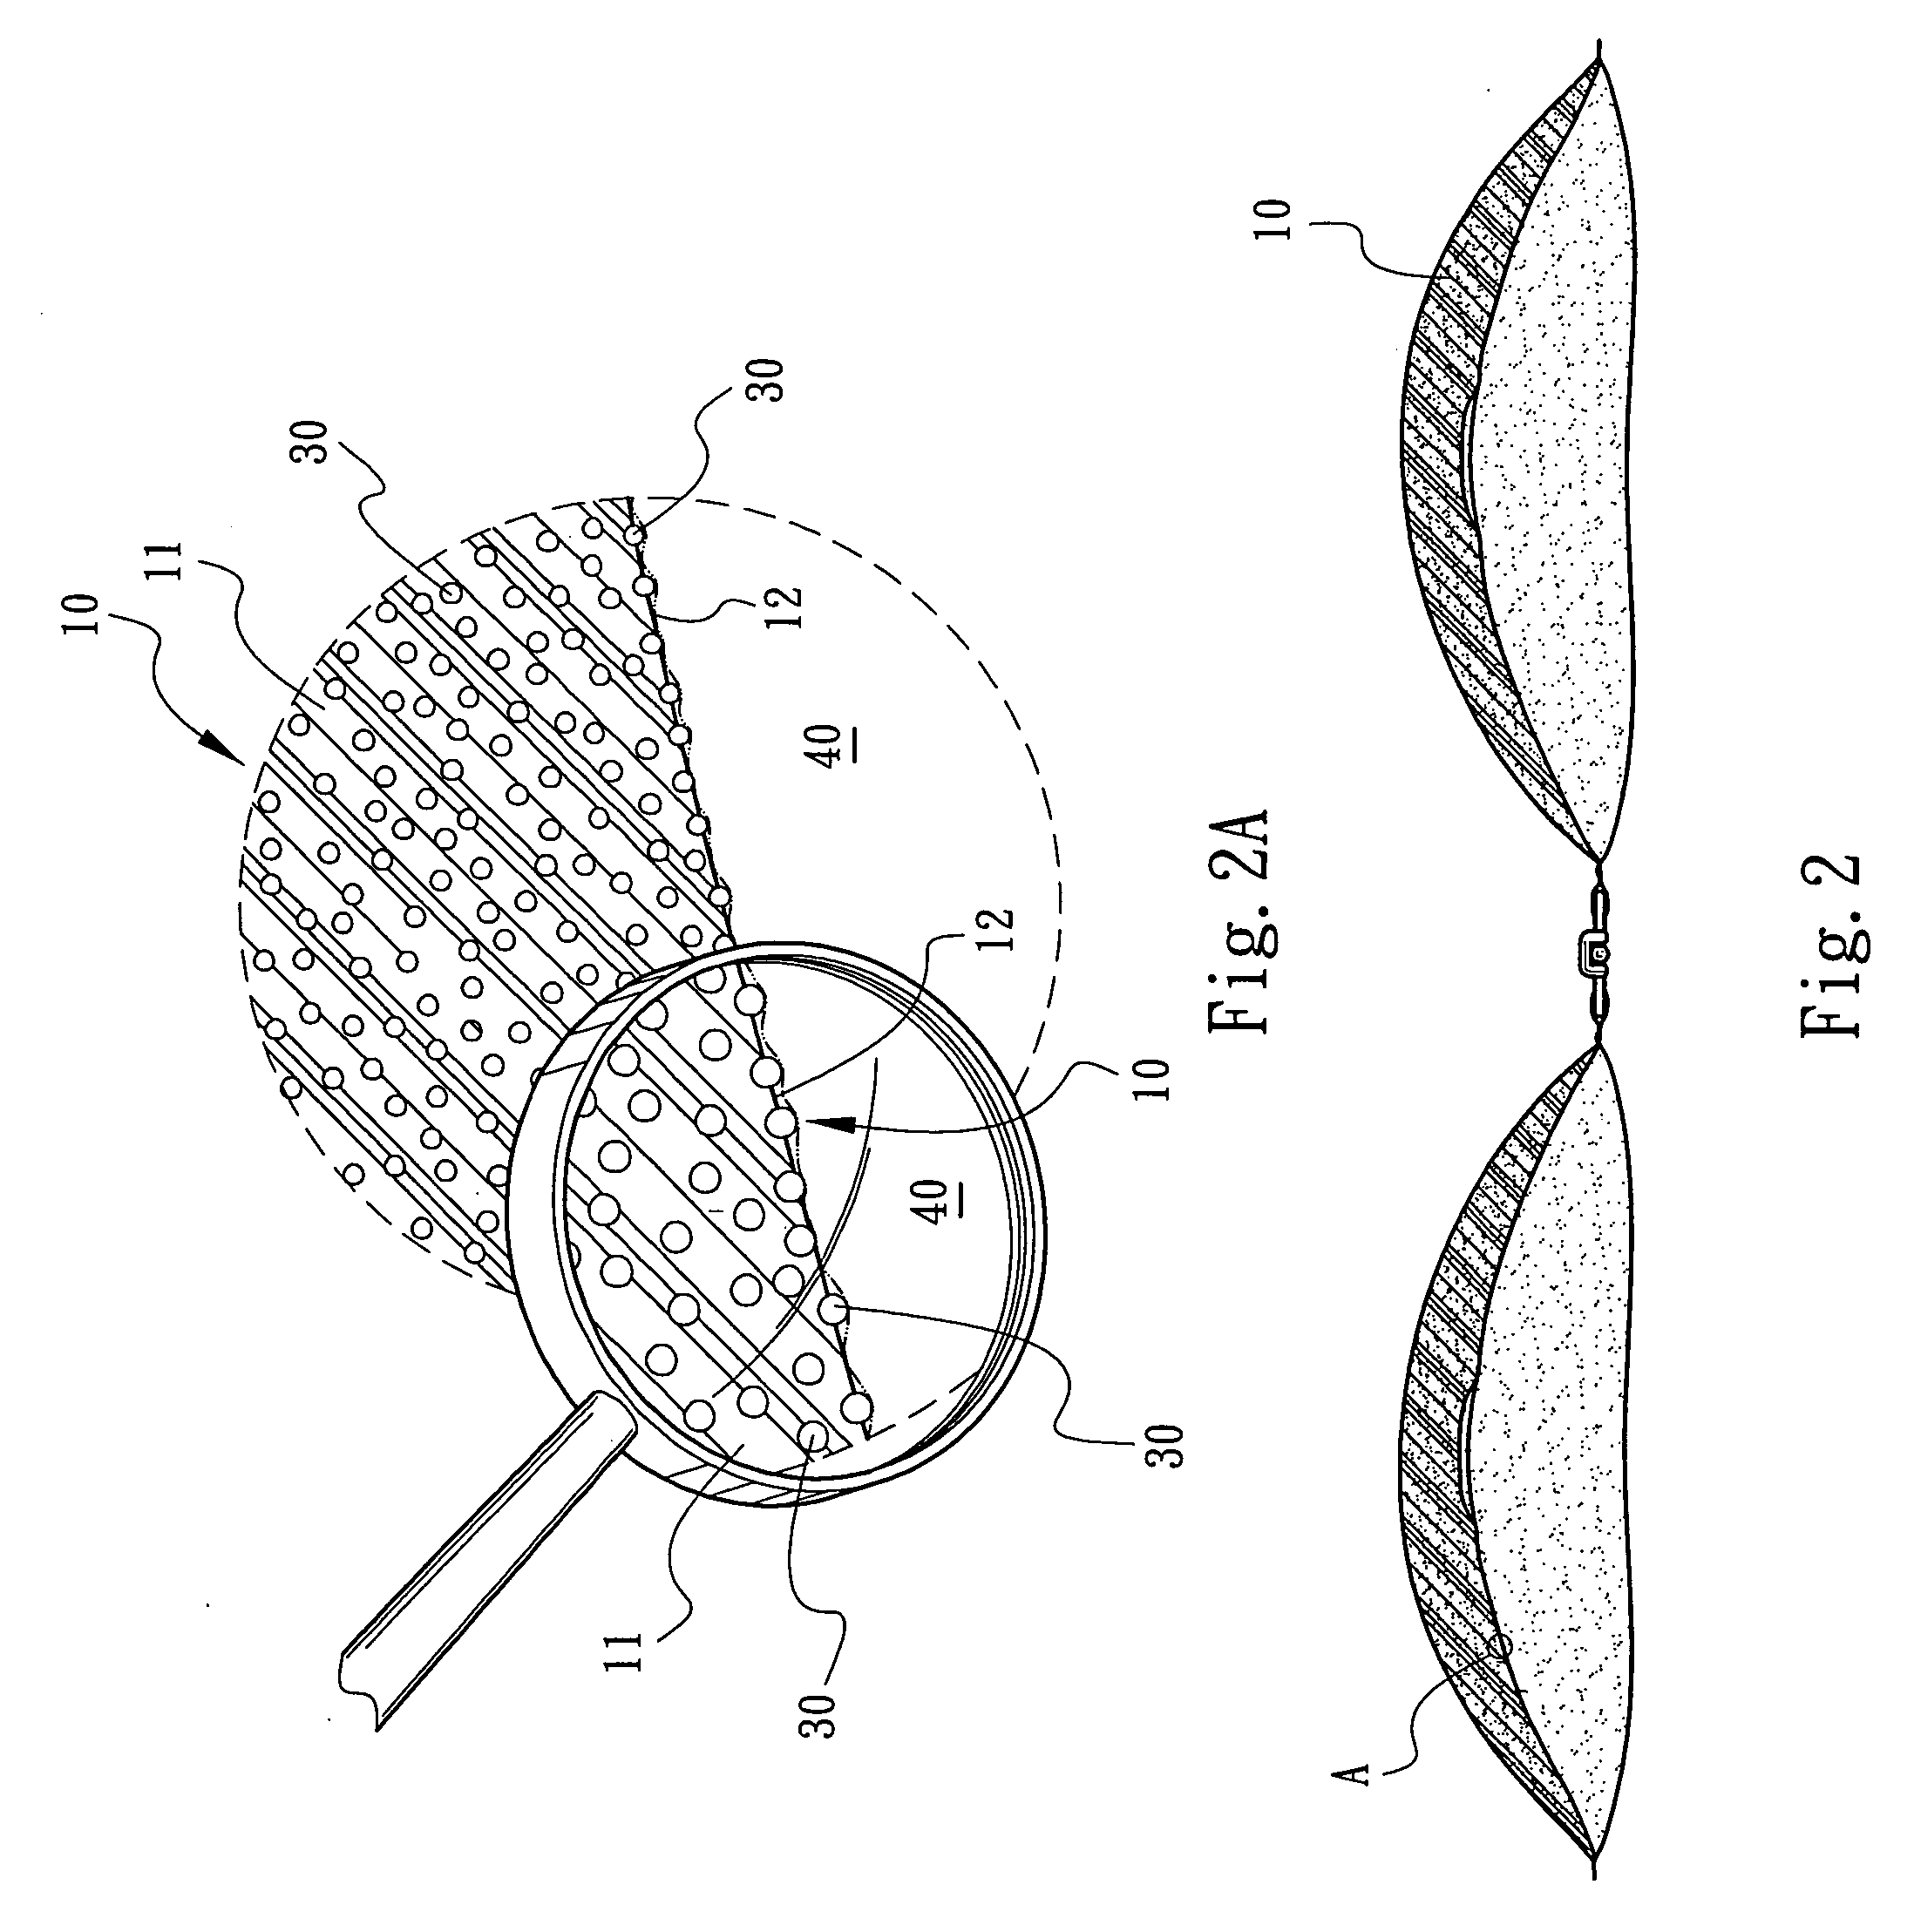 Brassiere pad (cup) structure having negative electromagnetic energy